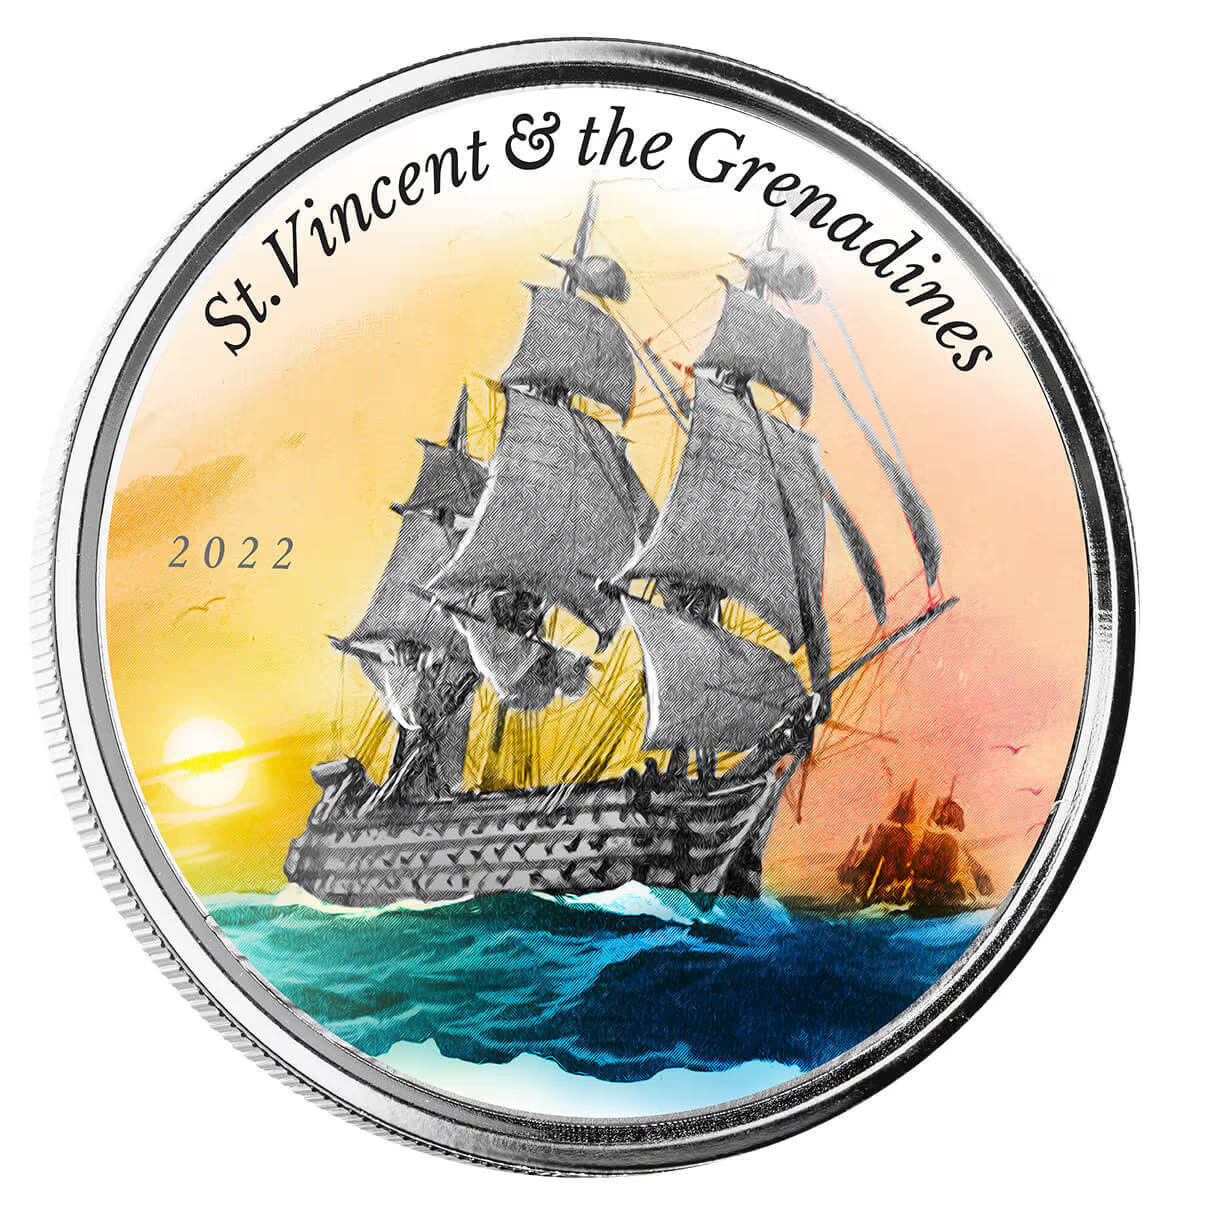 1 Oz Silver Coin 2022 EC8 St. Vincent & the Grenadines $2 Color Proof - Warship-classypw.com-1